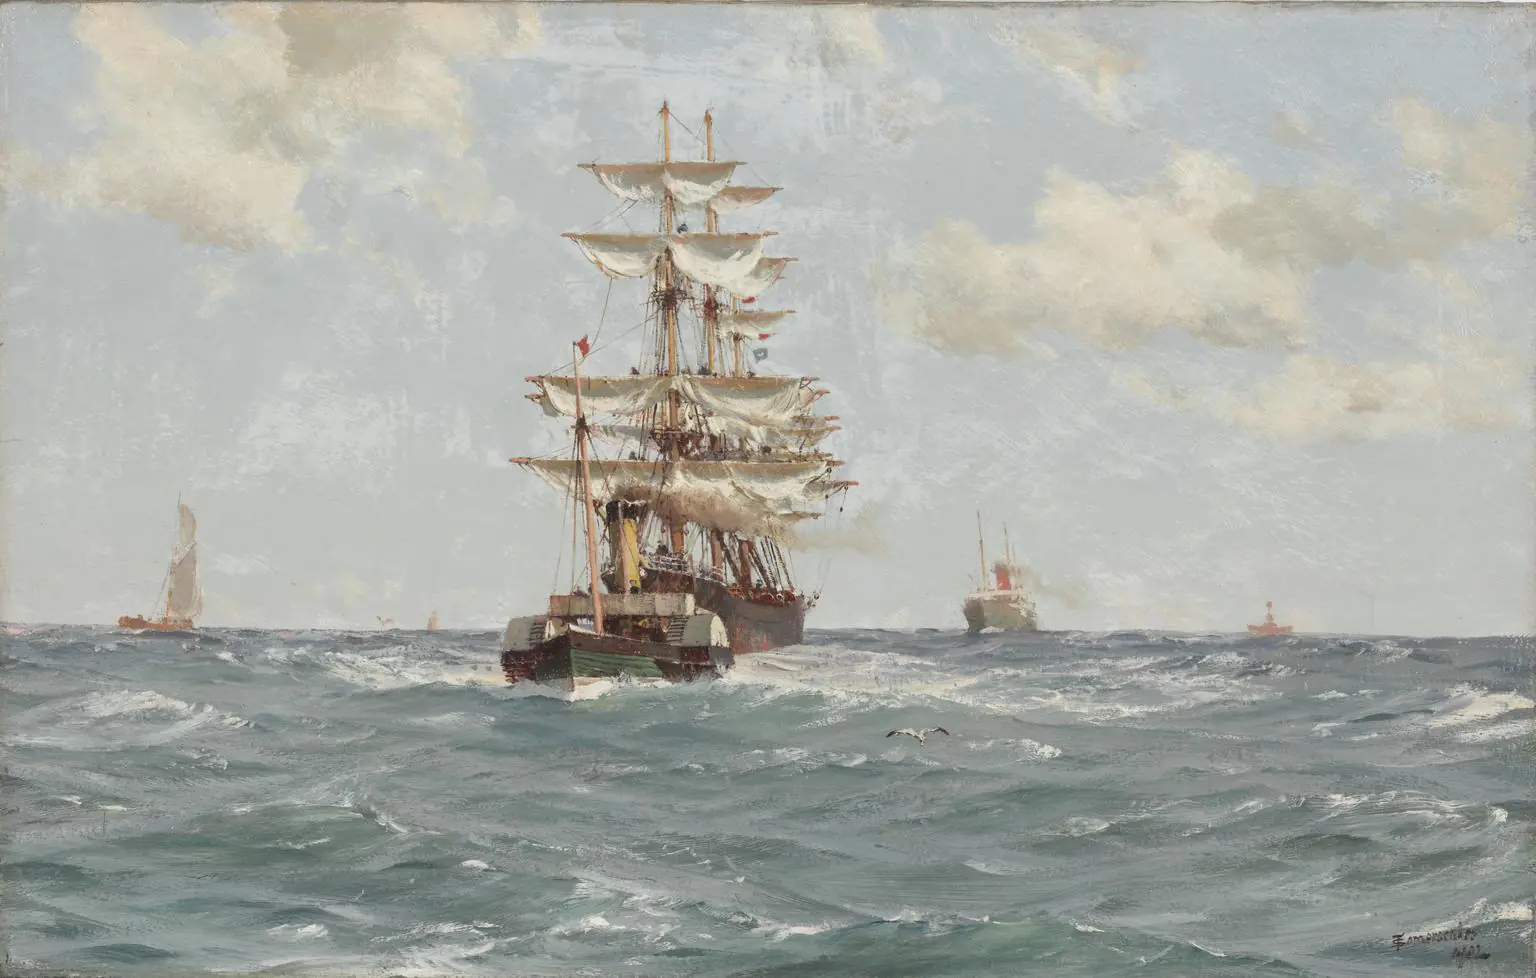 Paddle Tug towing Full Rigged Ship (oil painting)